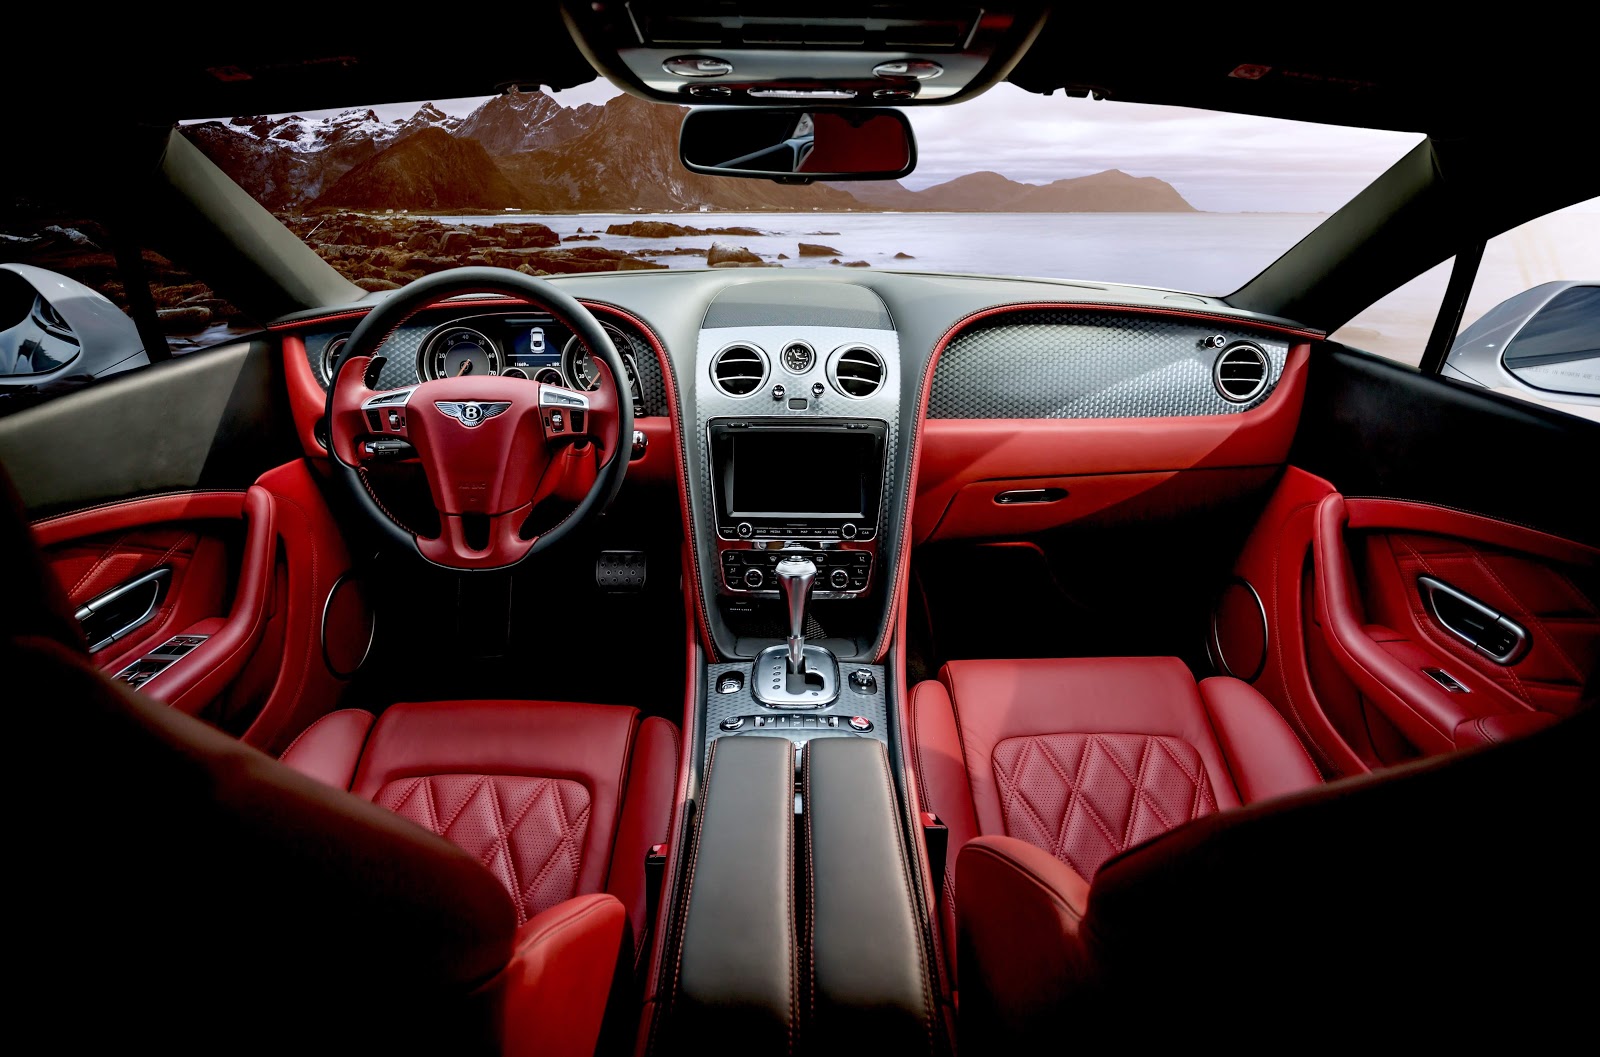 This is one of the biggest benefits of a complete detail. You have yourself a beautiful complete detailed interior
